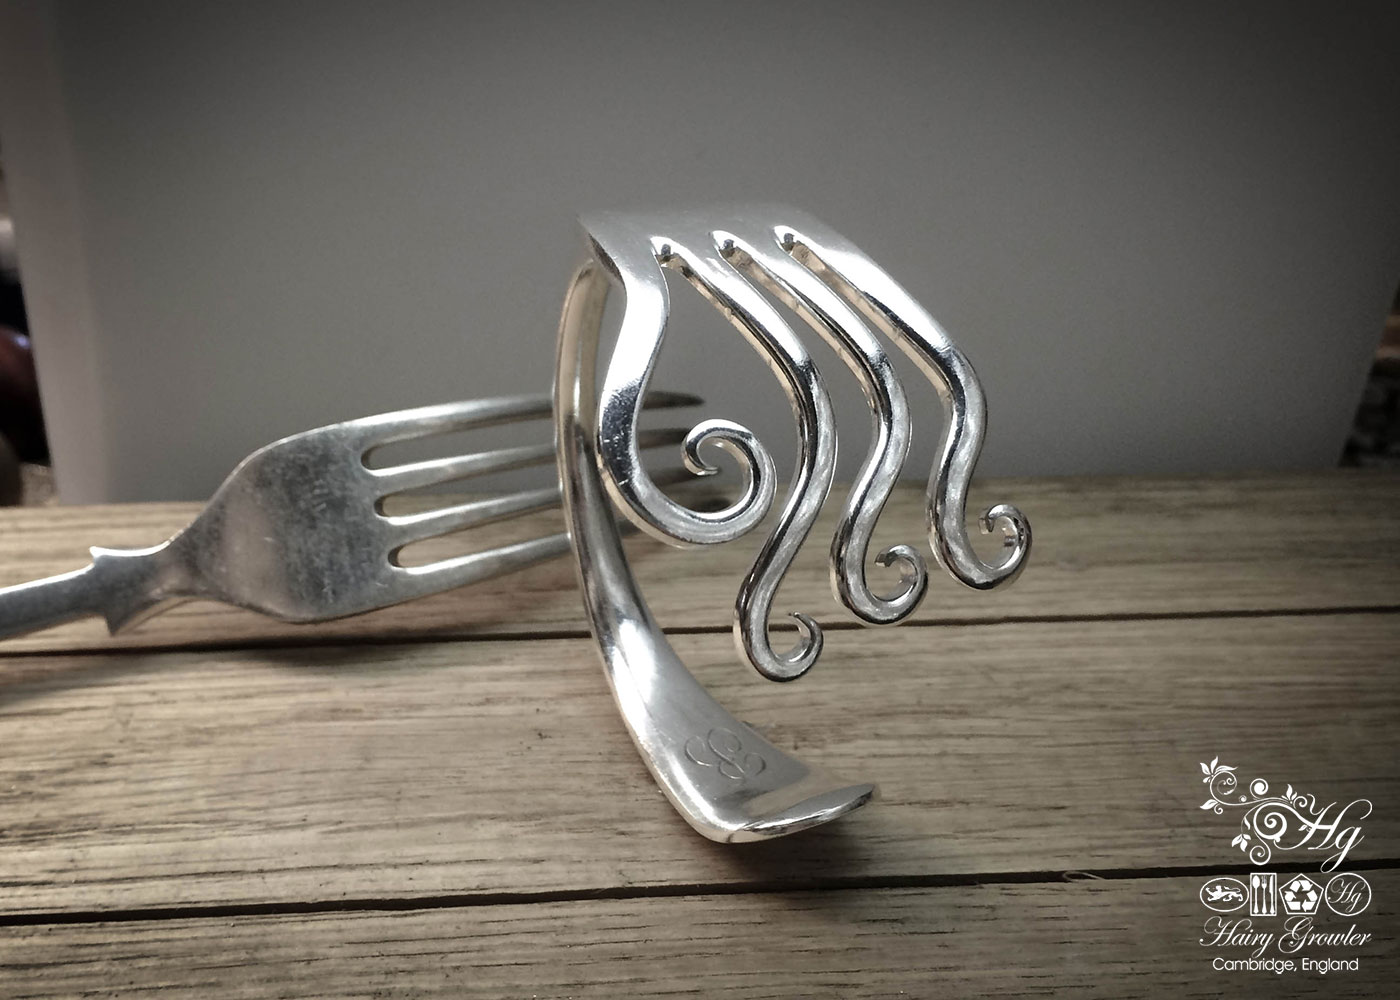 Handcrafted and recycled silver waves bangle